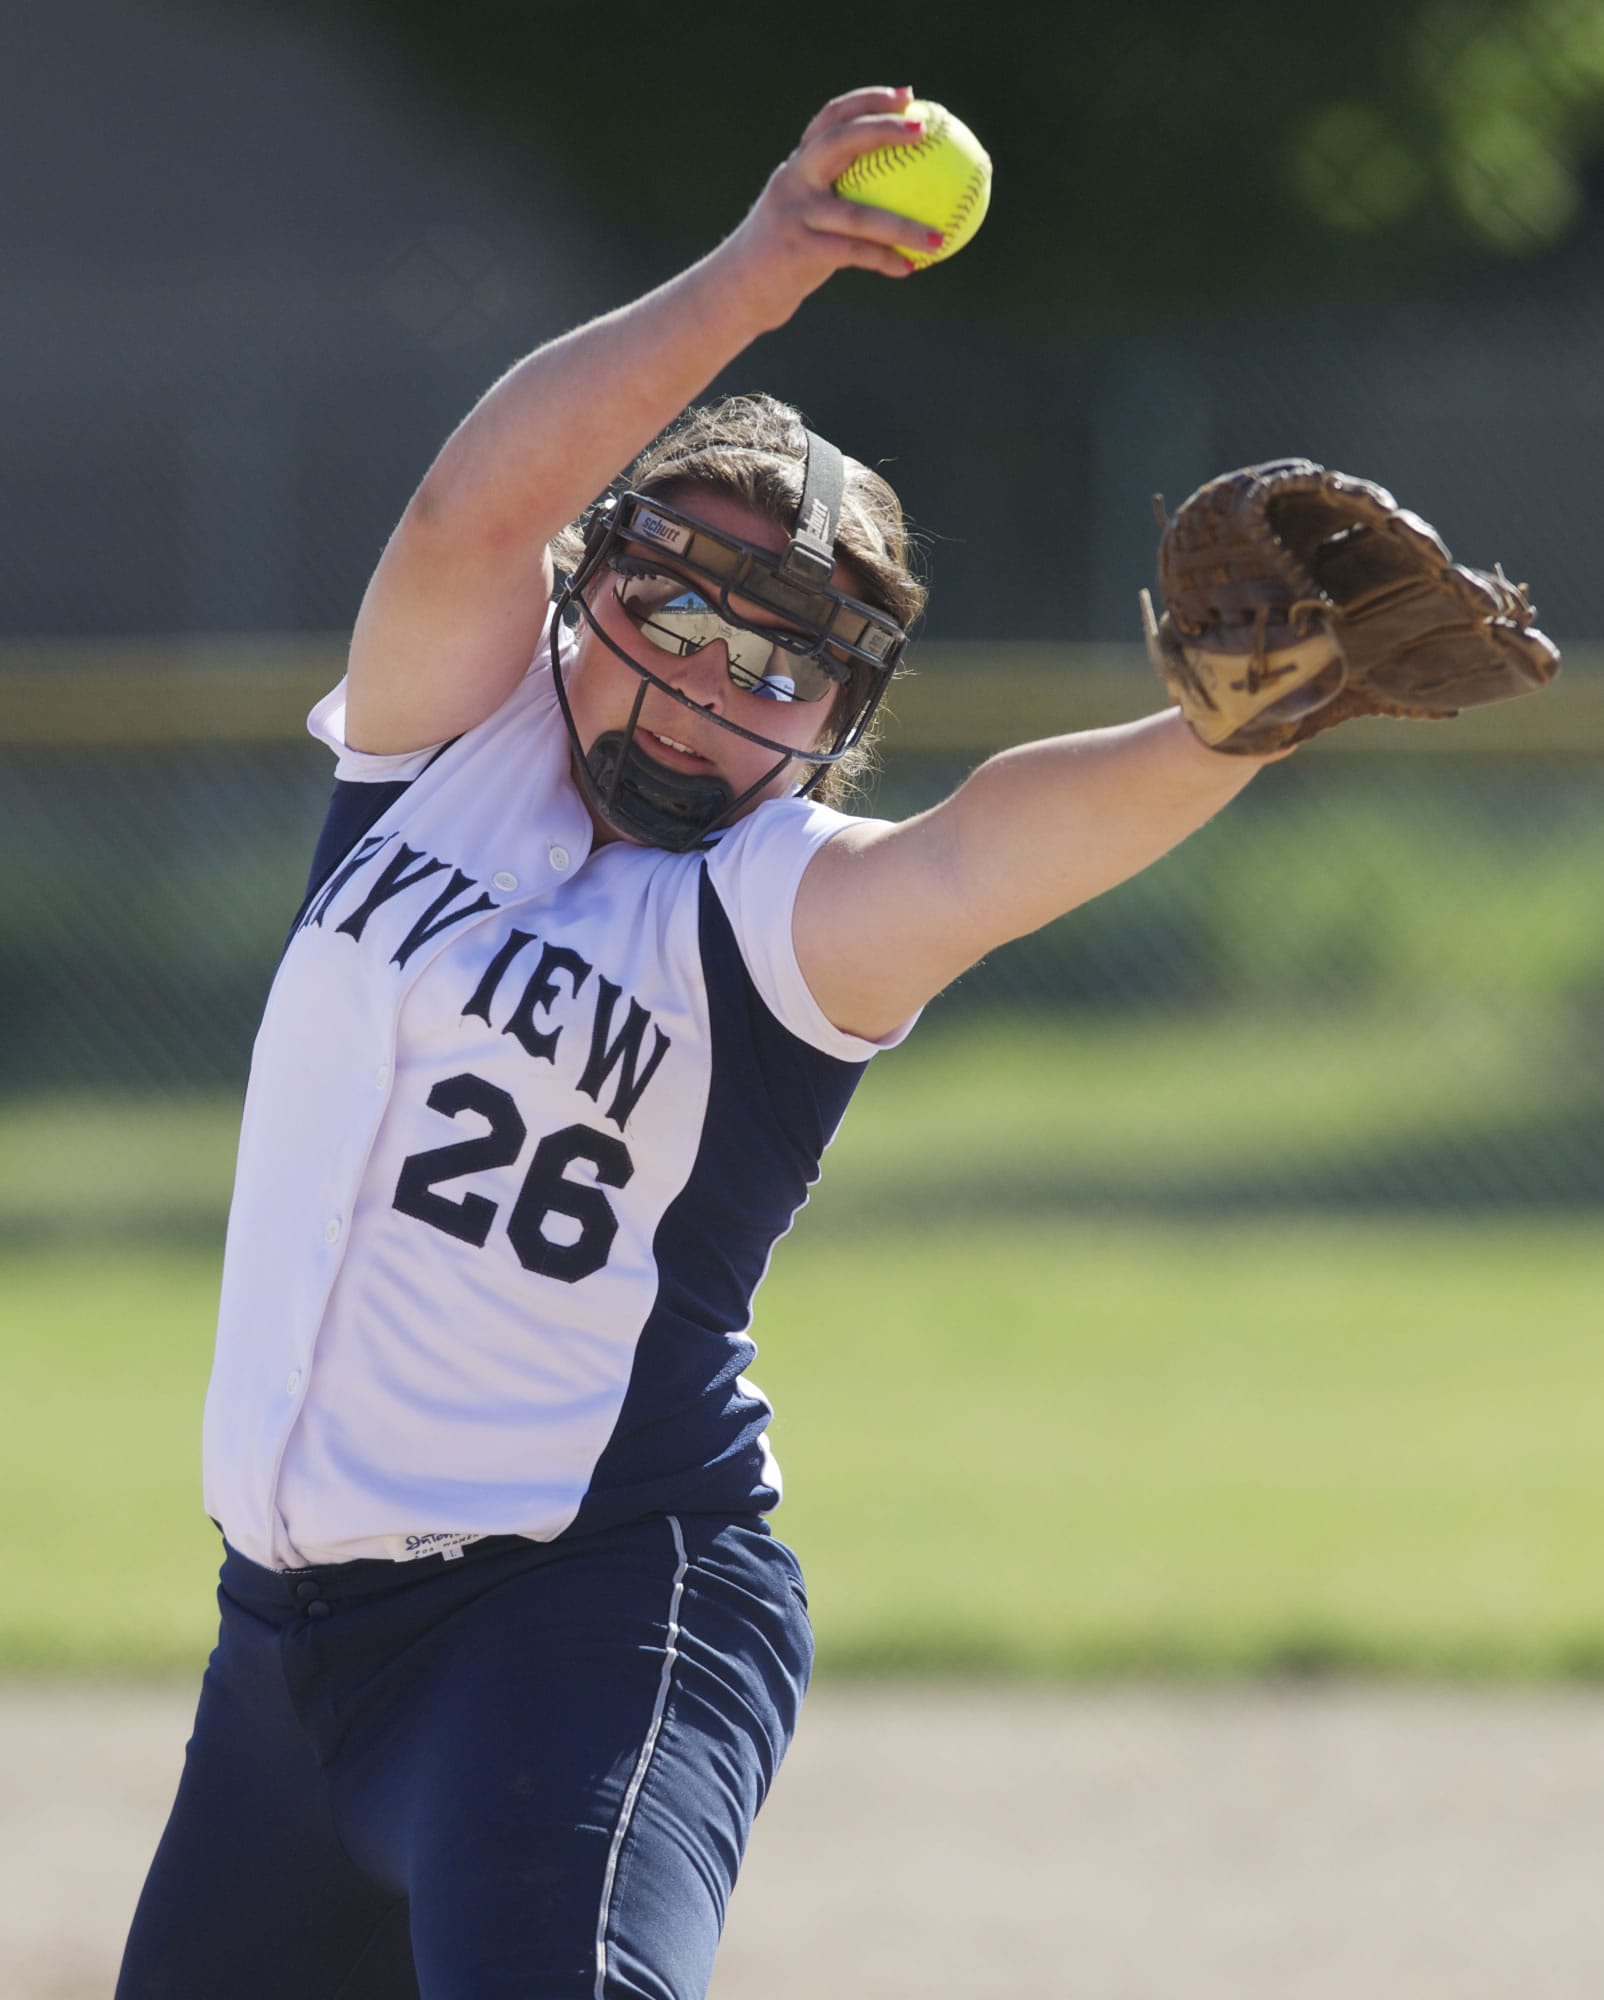 Skyview's Michelle Brincefield struck out 14 batters in throwing a two-hit shut out of Camas in the Class 4A district softball game Tuesday at Heritage.